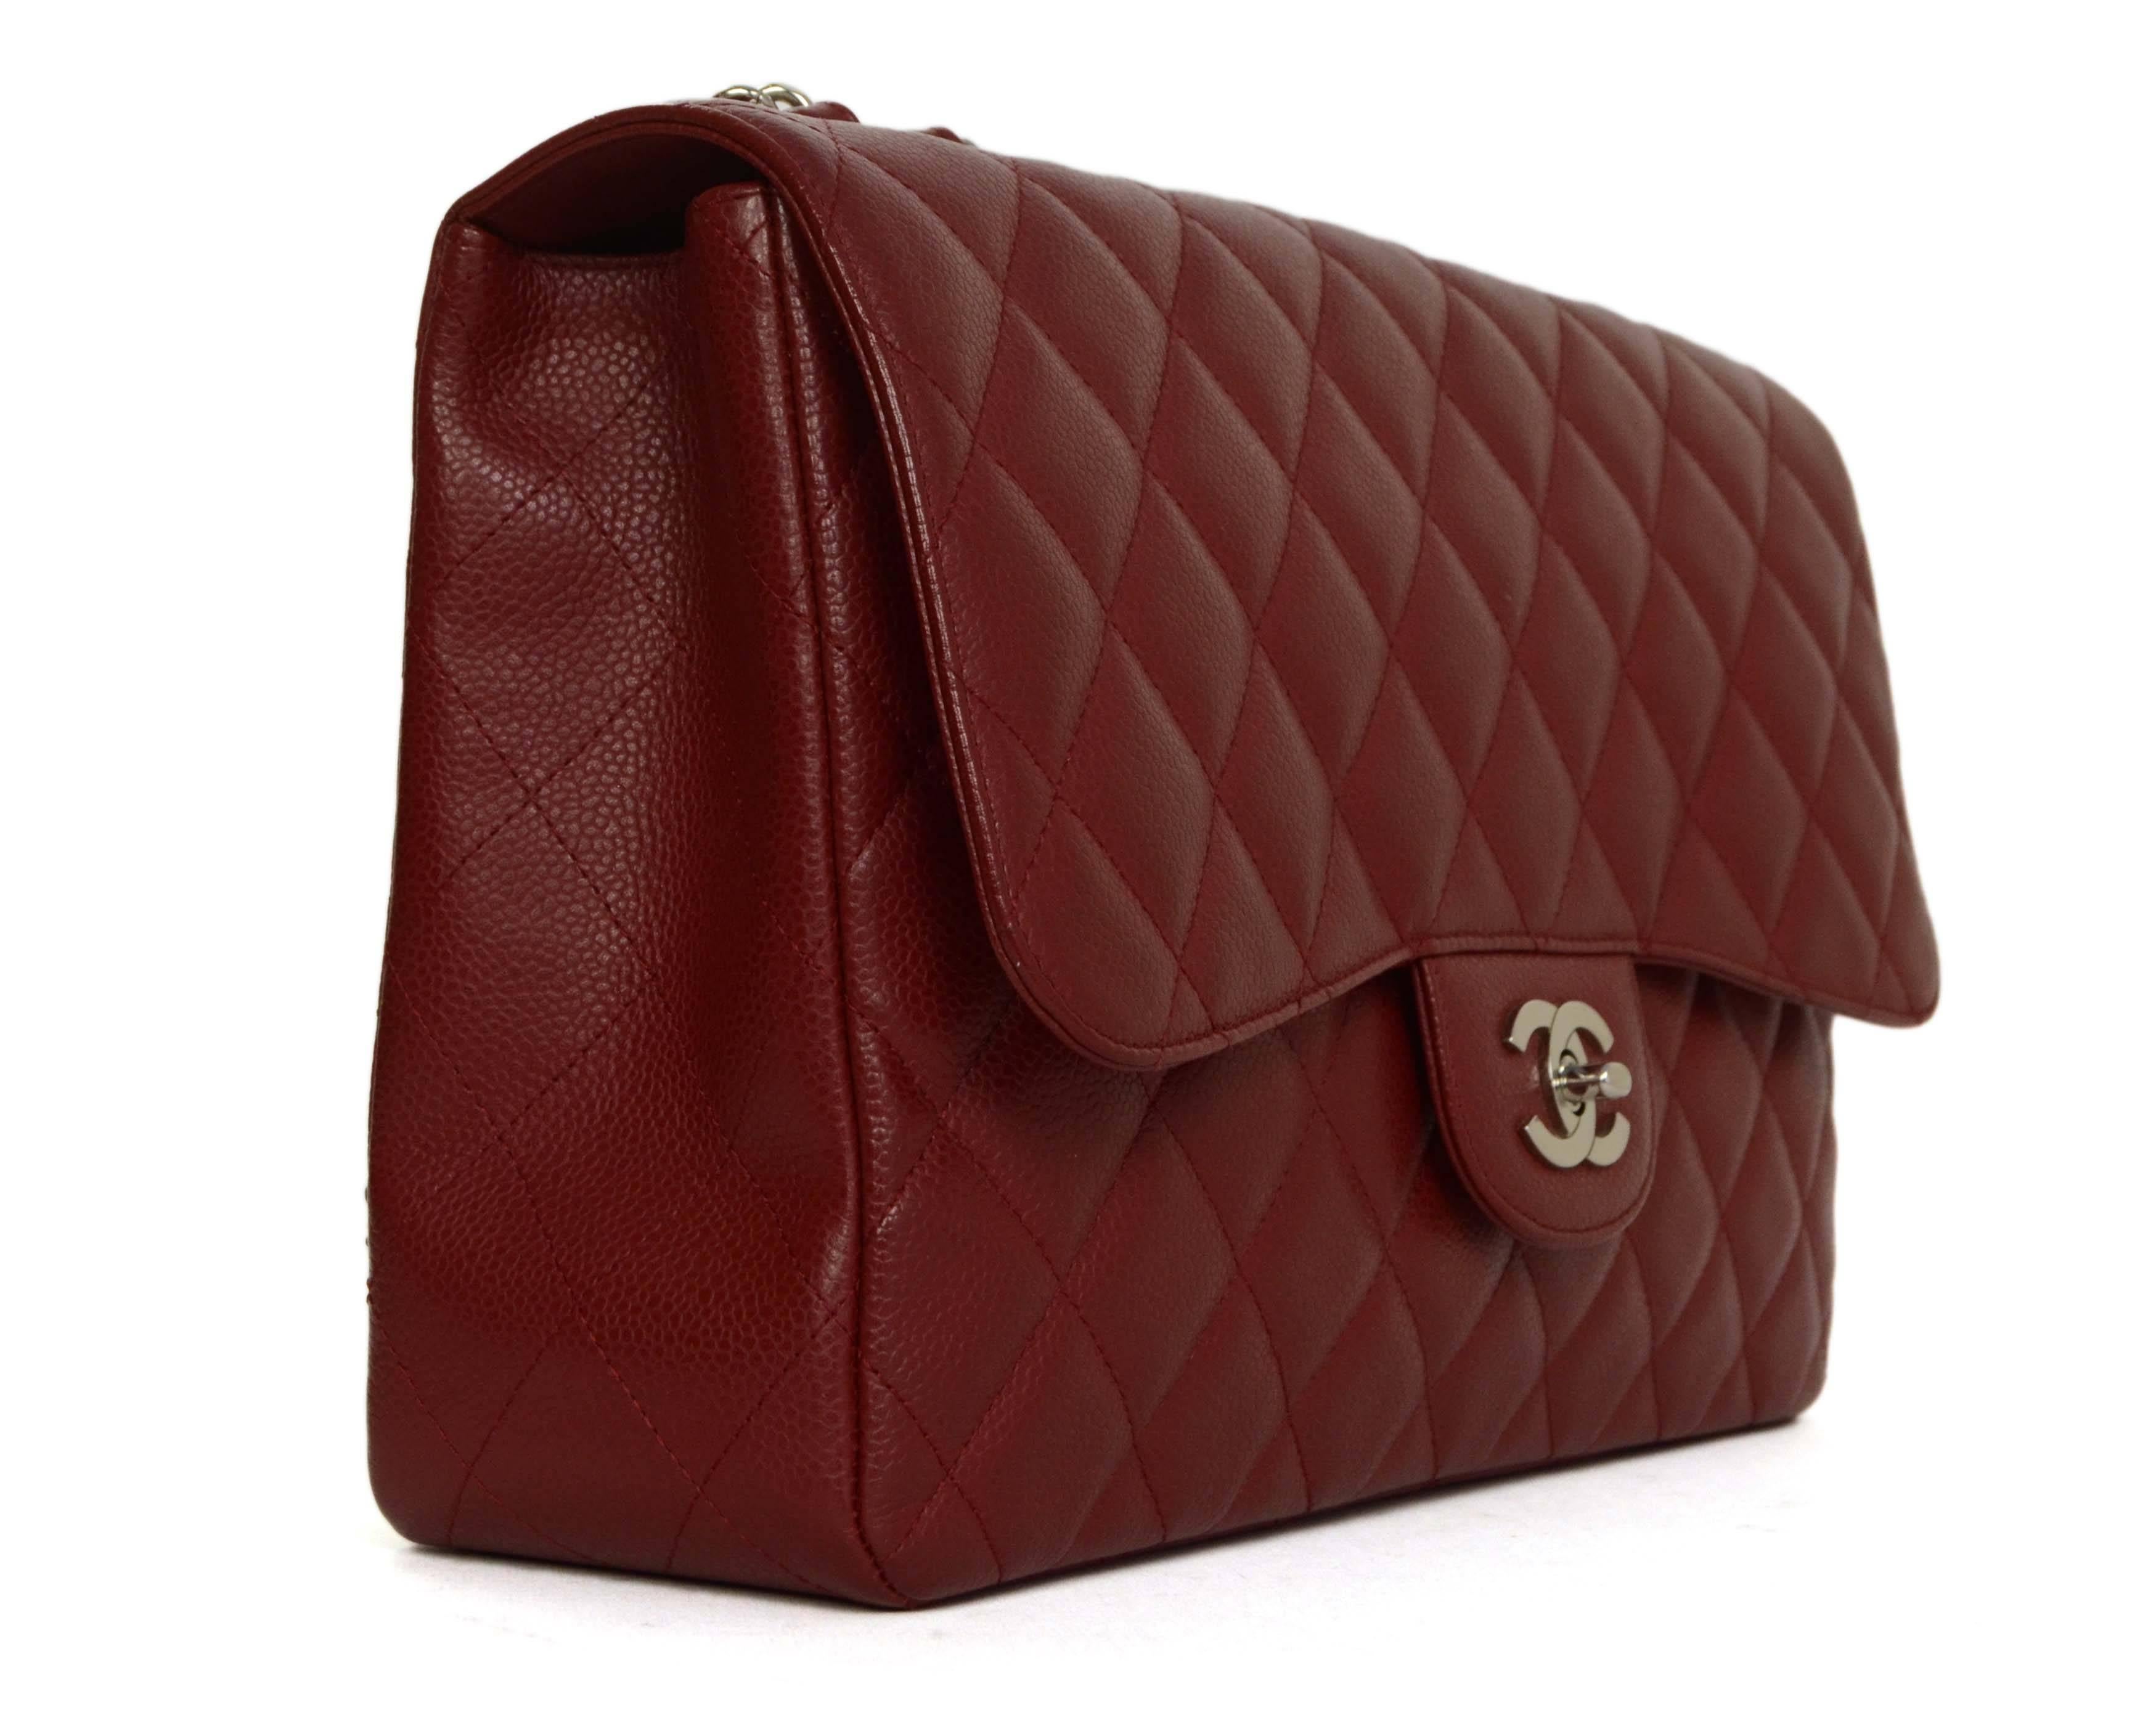 Chanel Red Quilted Caviar Single Flap Jumbo Classic Bag 
Features adjustable shoulder strap
Made In: France
Year of Production: 2009
Color: Red
Hardware: Silvertone
Materials: Caviar leather and metal
Lining: Red leather
Closure/Opening: